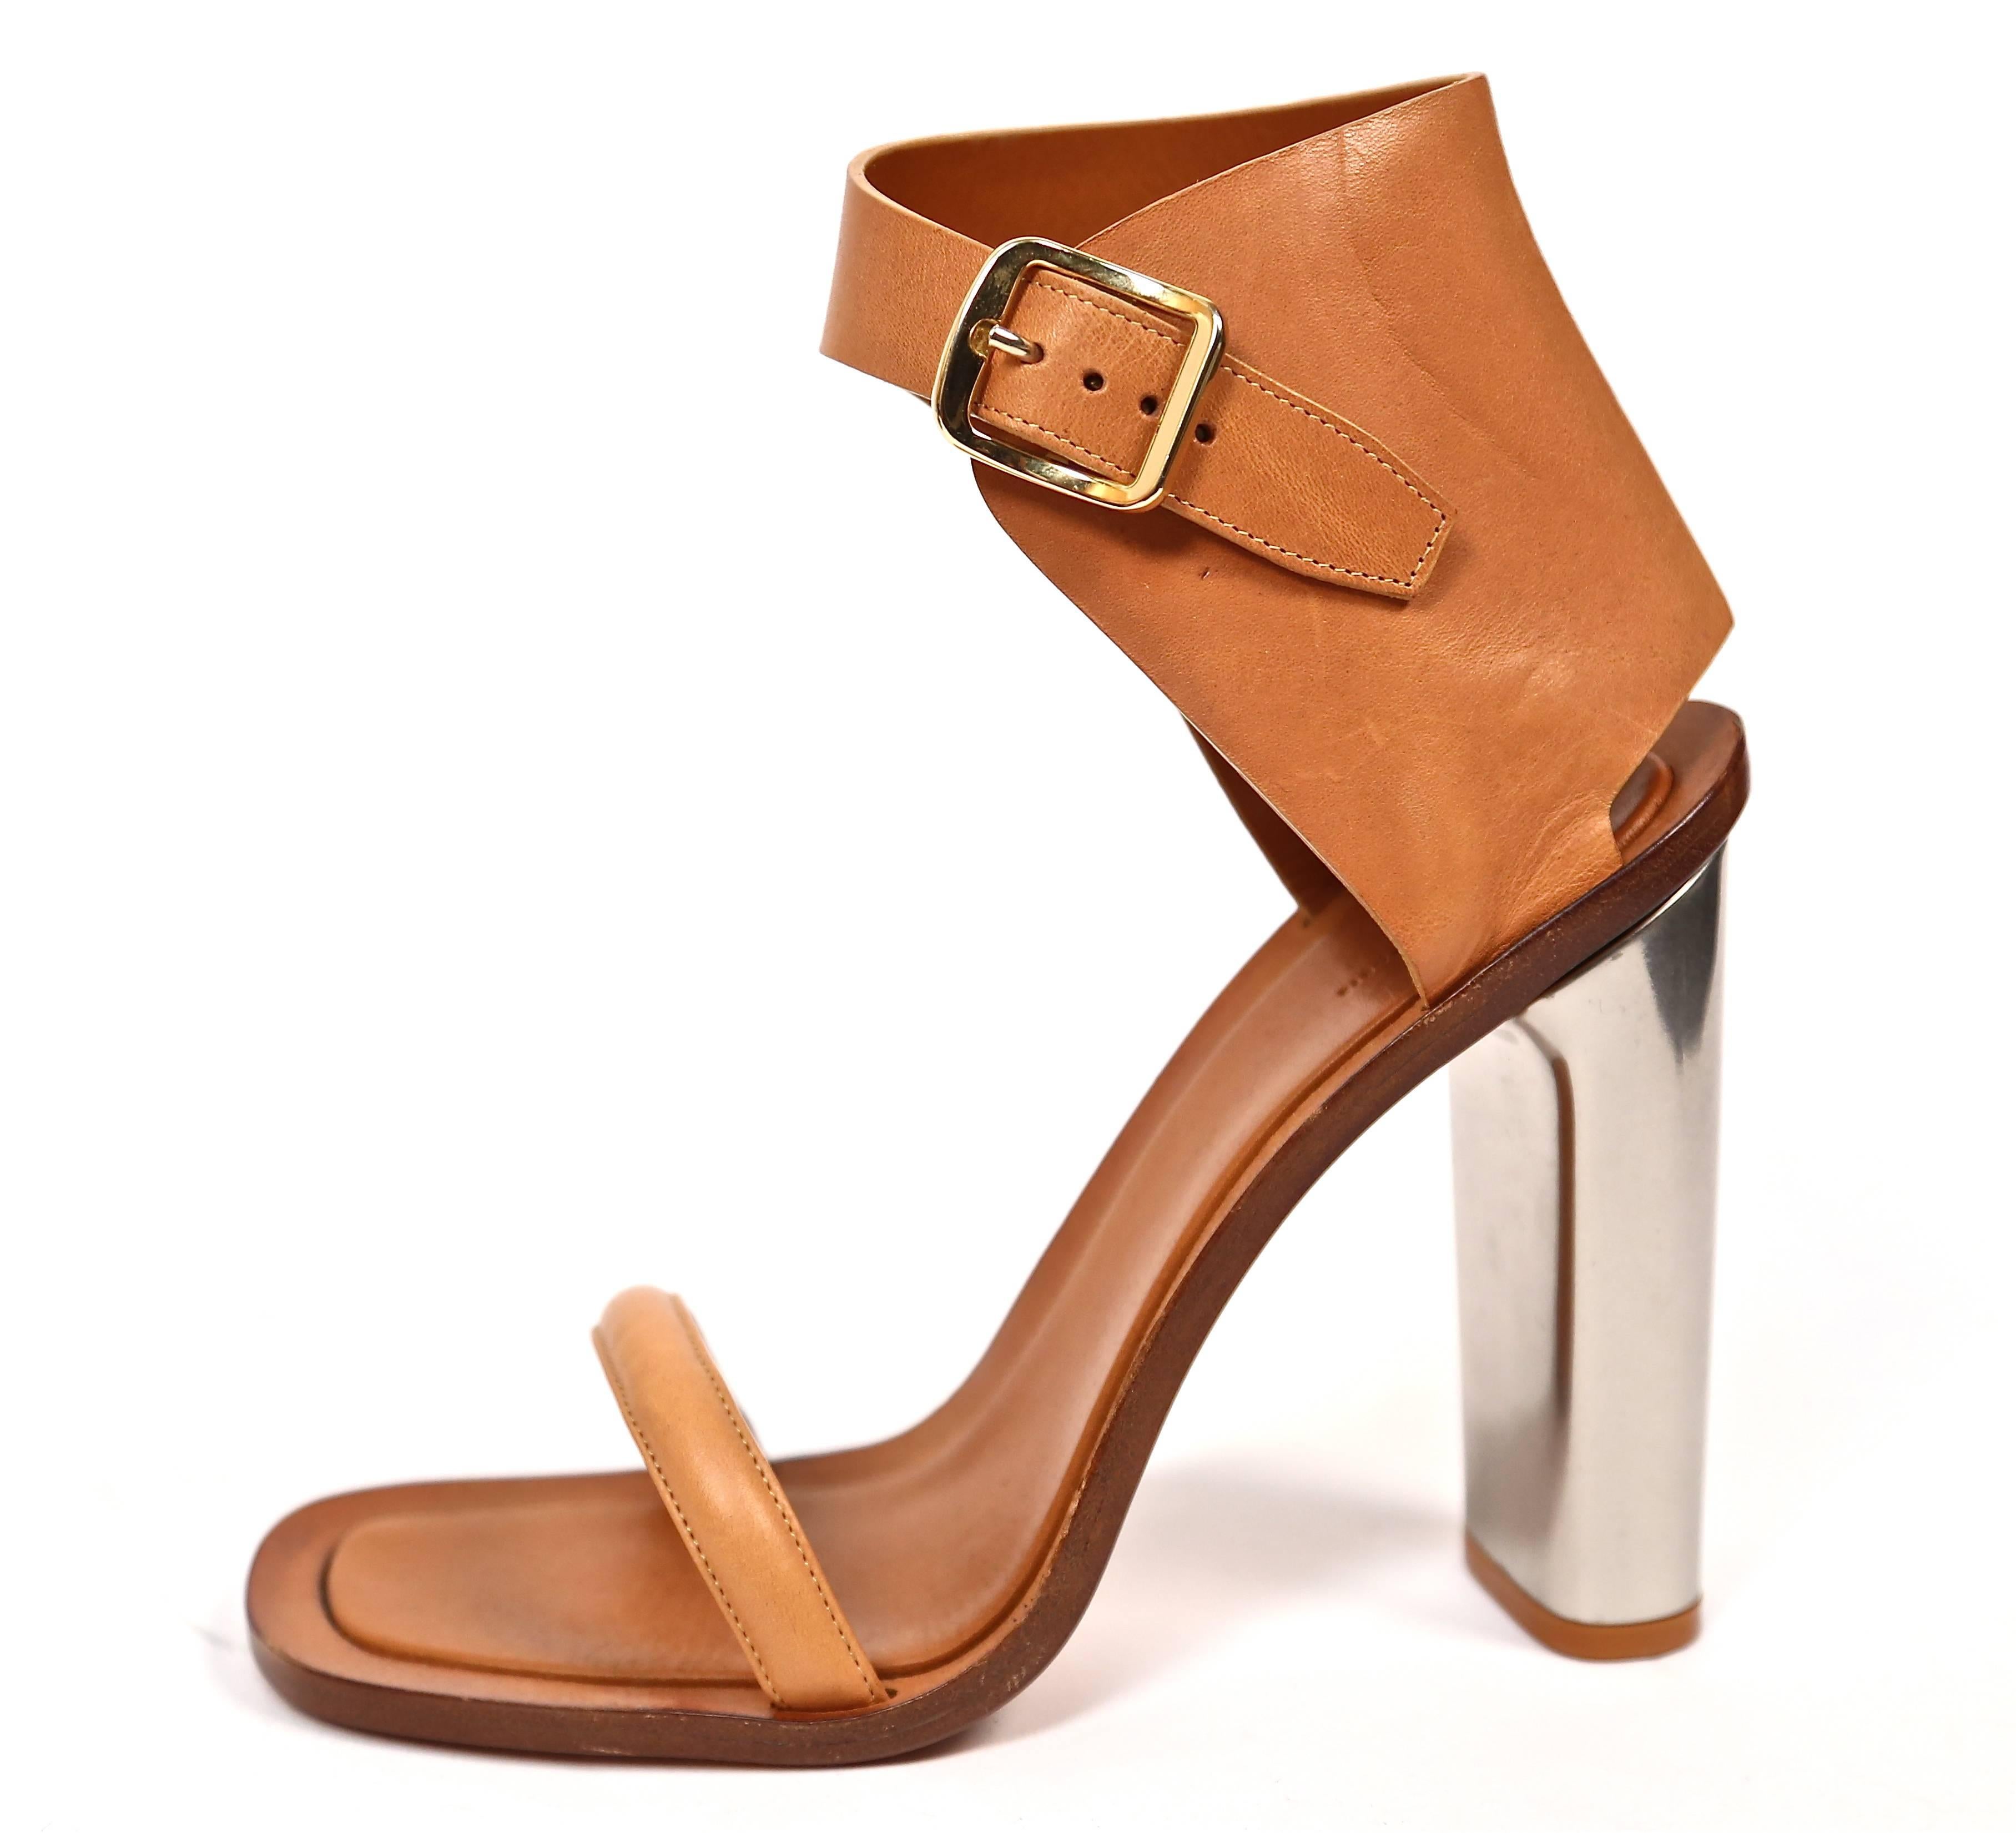 Tan leather bam bam sandals with silver metal heels from Celine. French size 40.5. Insoles measure approximately just under 10.5" long by 3.5" and heels are approximately 5"high. Leather soles, insoles and lining. Gold buckles at